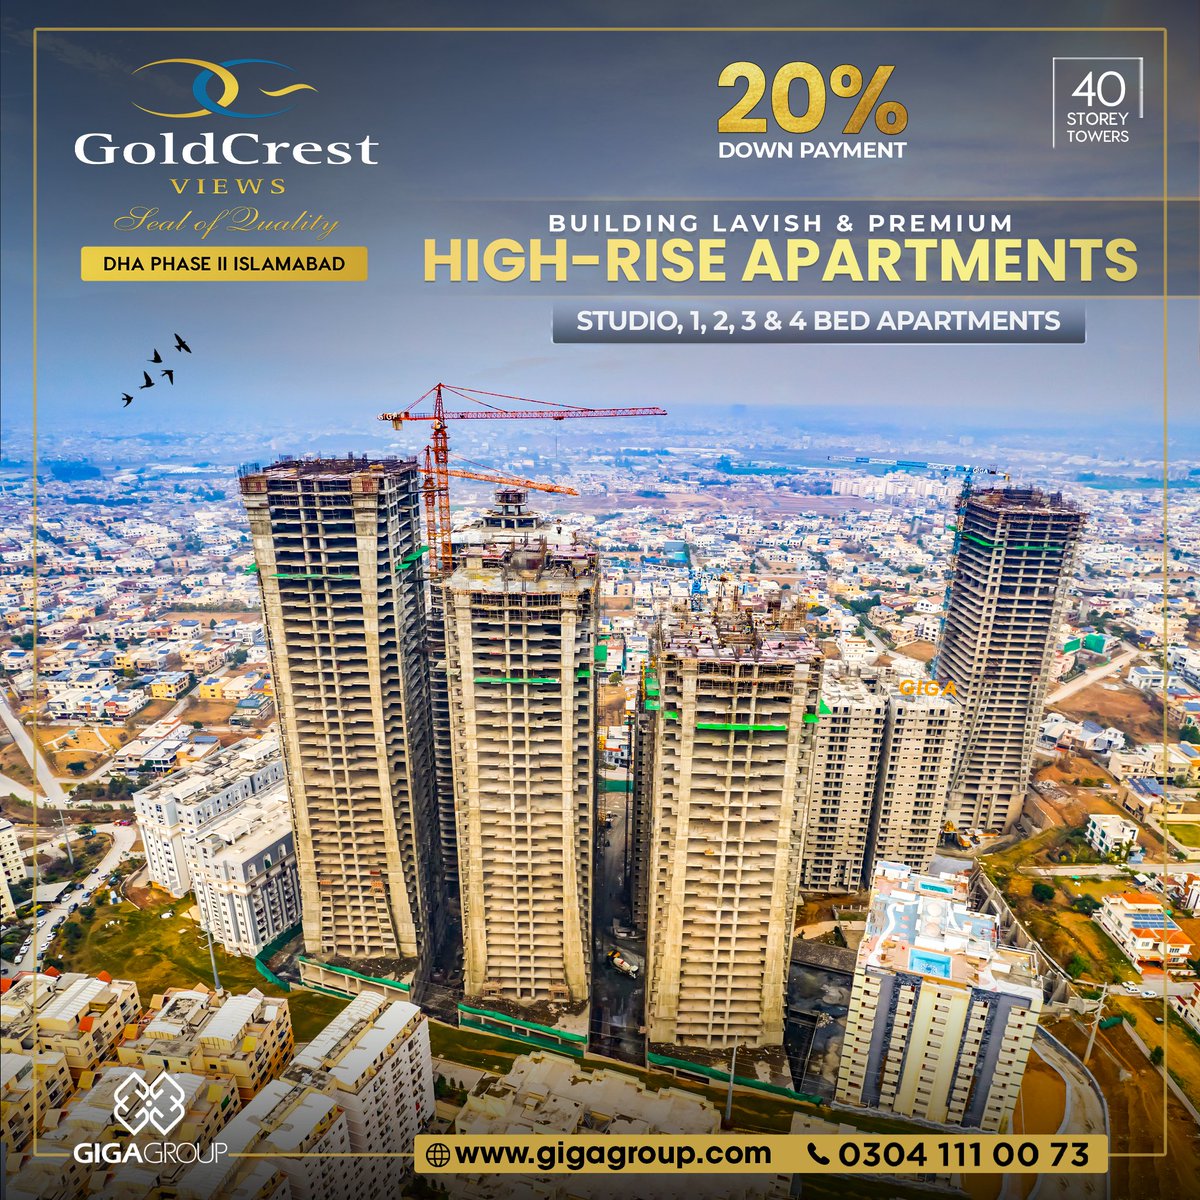 Building lavish & 𝐏𝐫𝐞𝐦𝐢𝐮𝐦 𝐇𝐢𝐠𝐡-𝐑𝐢𝐬𝐞 apartments! Open the door to a better life in Pakistan with our commitment to improving the living standards of our fellow citizens, 𝐆𝐢𝐠𝐚 𝐆𝐫𝐨𝐮𝐩 presents the 40 storey award winning luxury project of Dubai,…